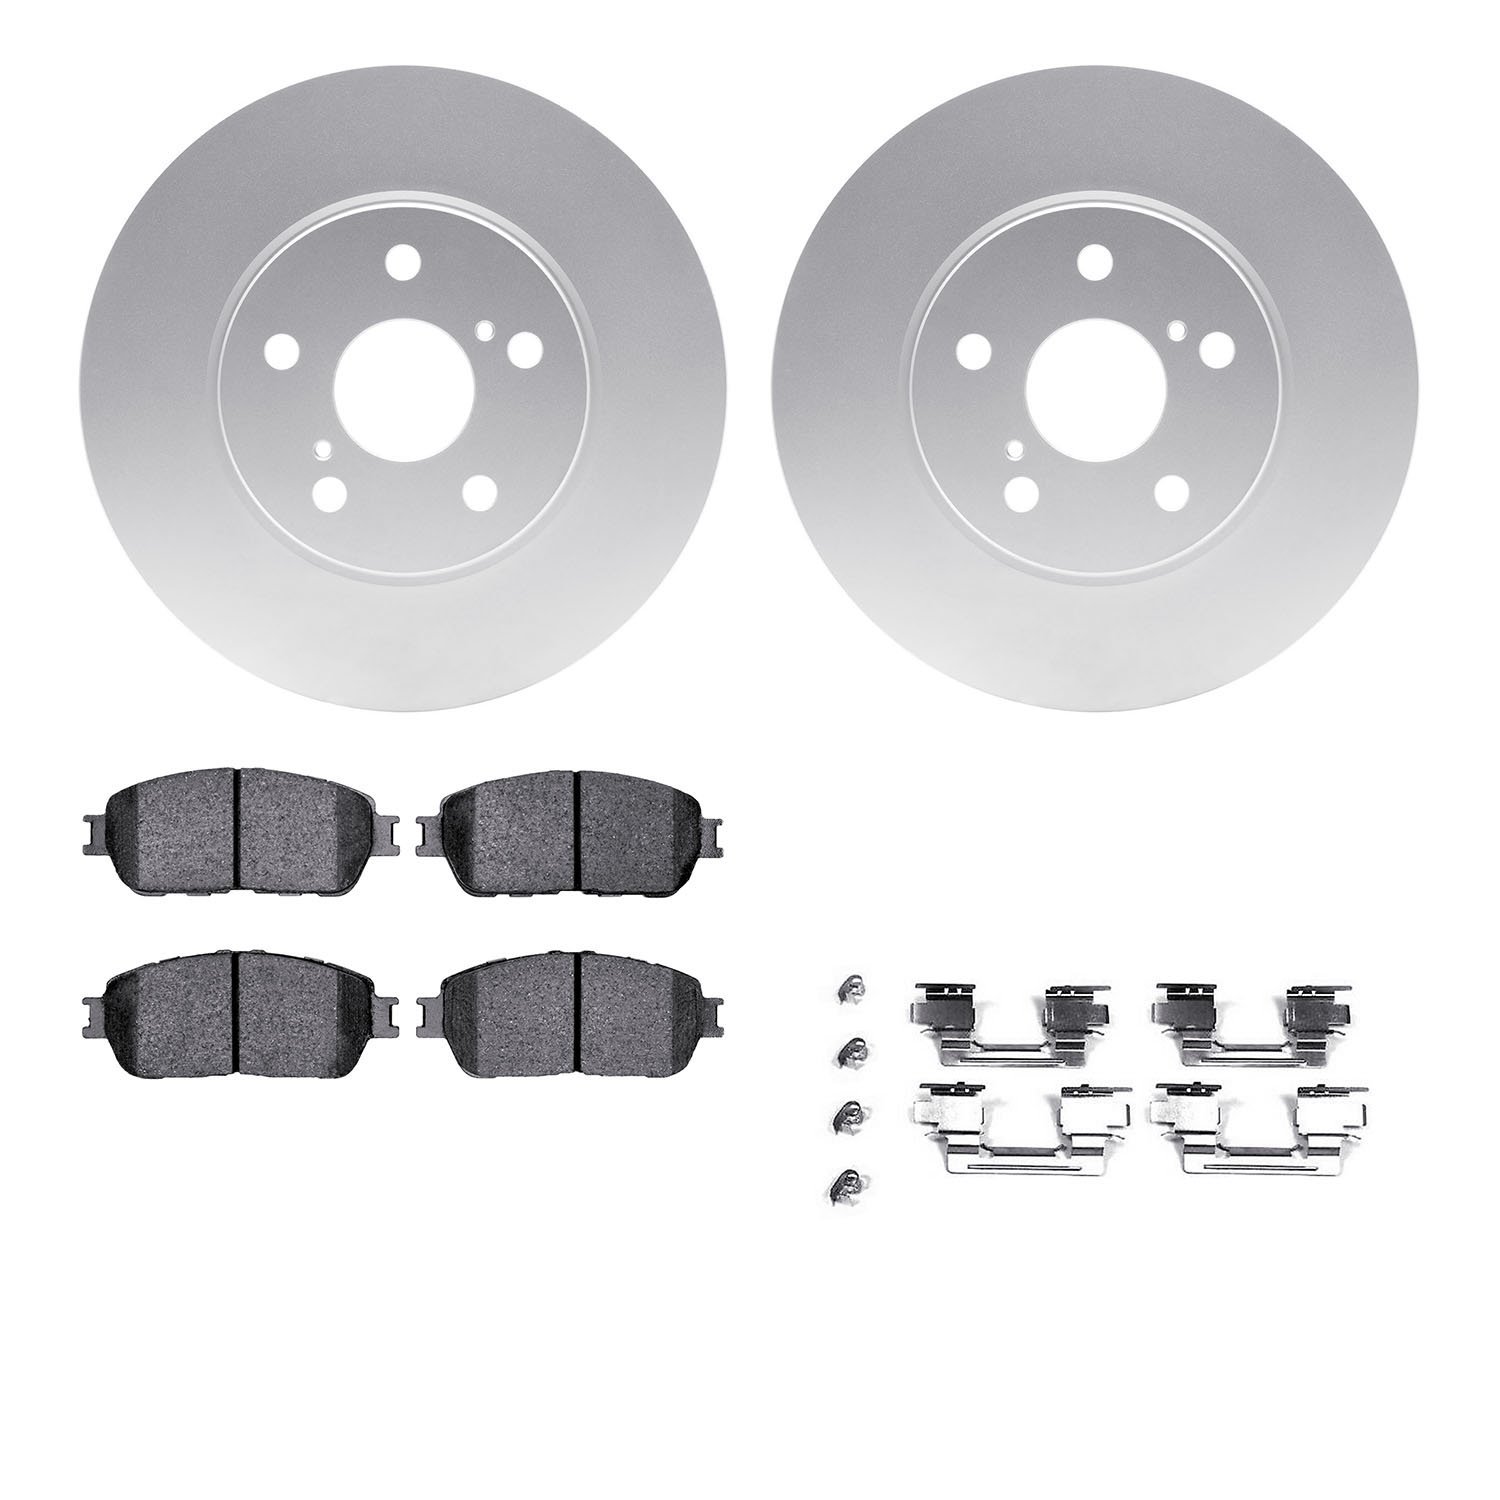 4412-76001 Geospec Brake Rotors with Ultimate-Duty Brake Pads & Hardware, 2004-2010 Lexus/Toyota/Scion, Position: Front